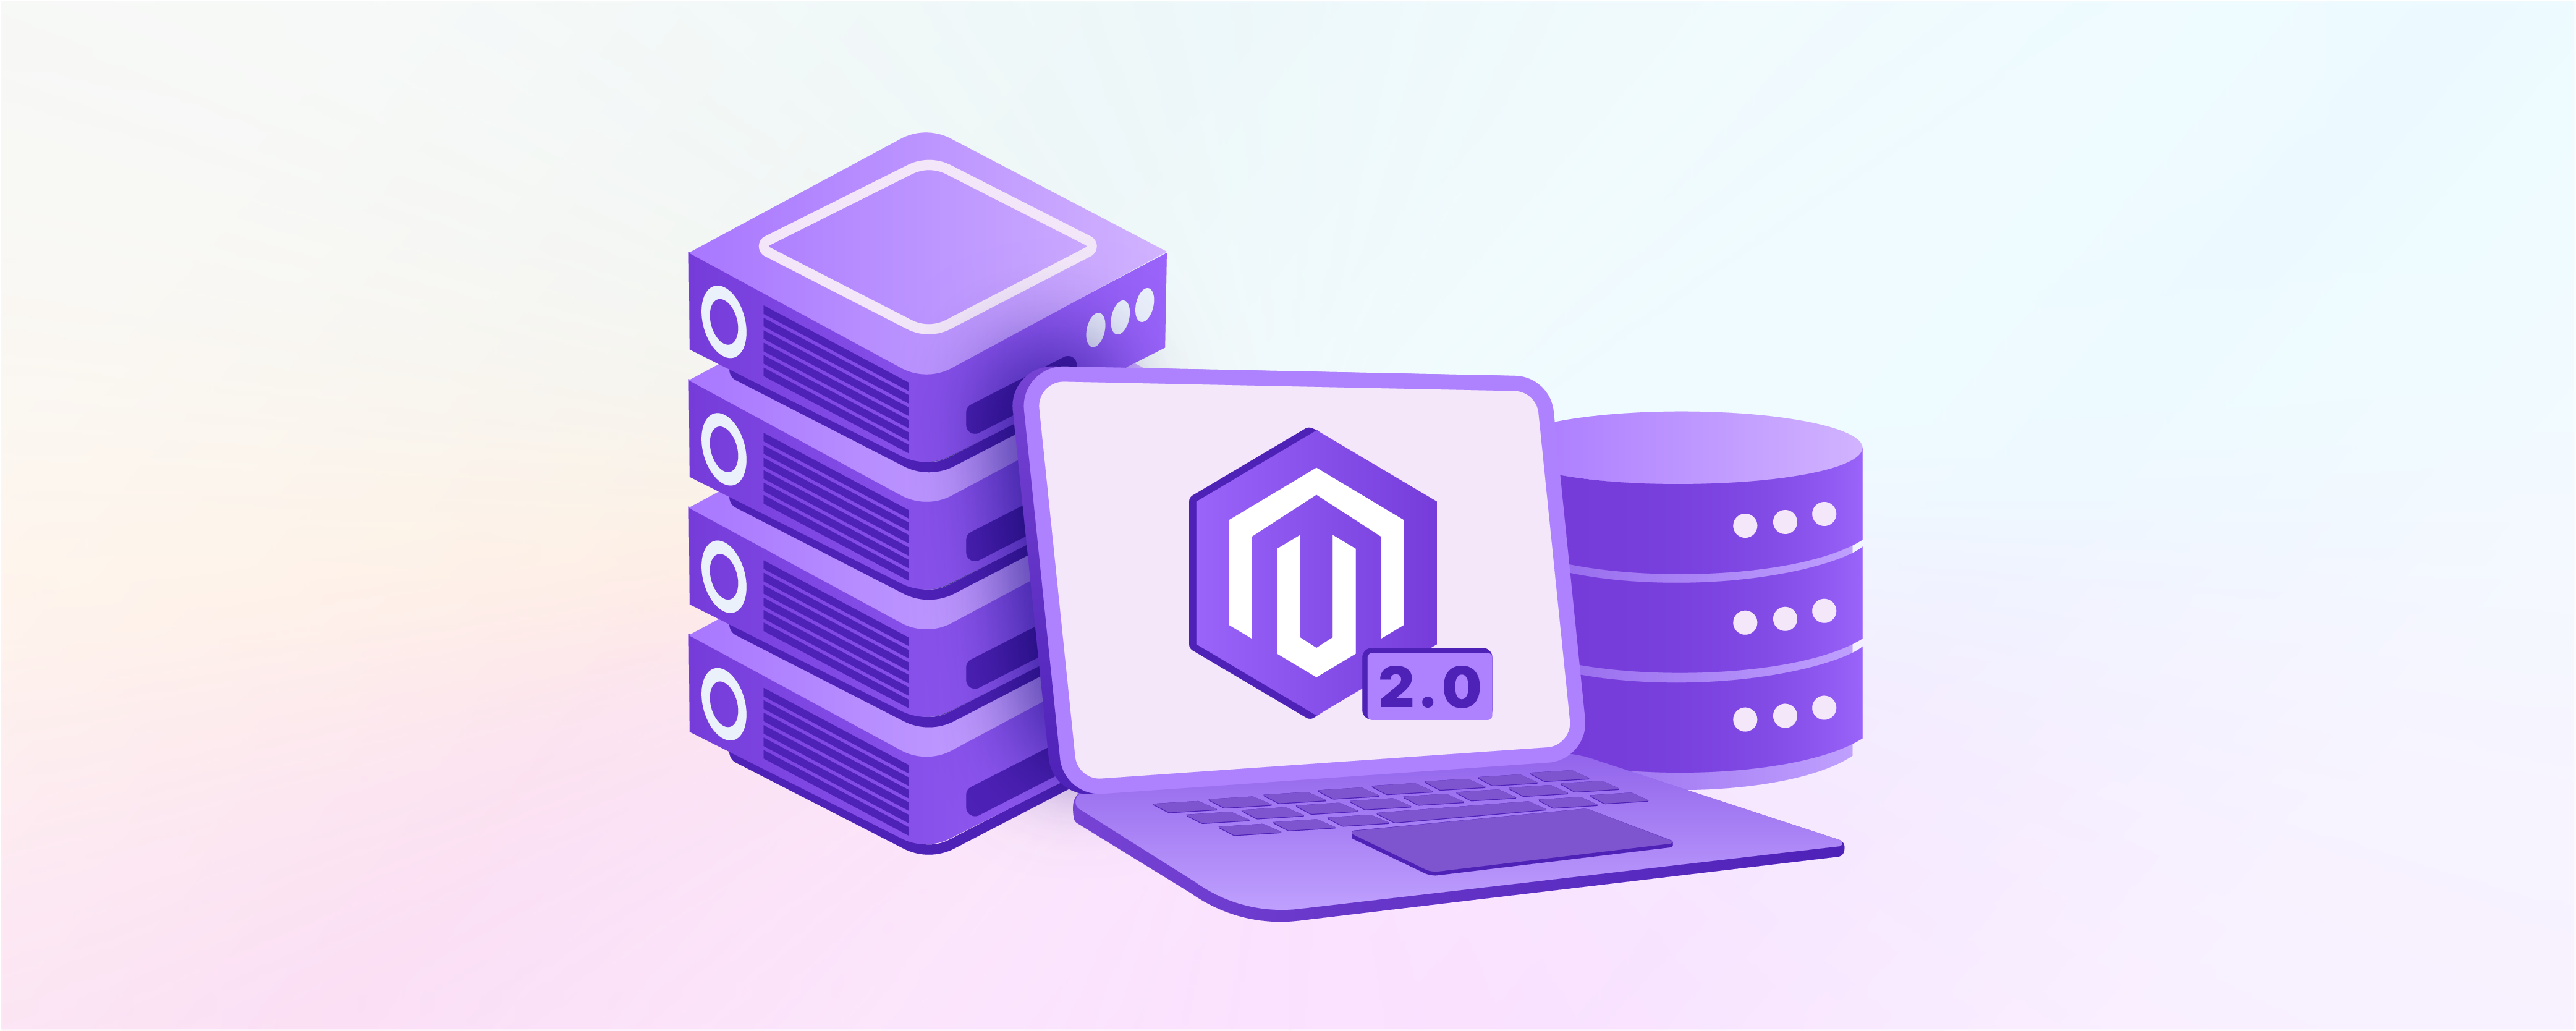 Magento 2.0 Hosting: Key Insights & Best Practices